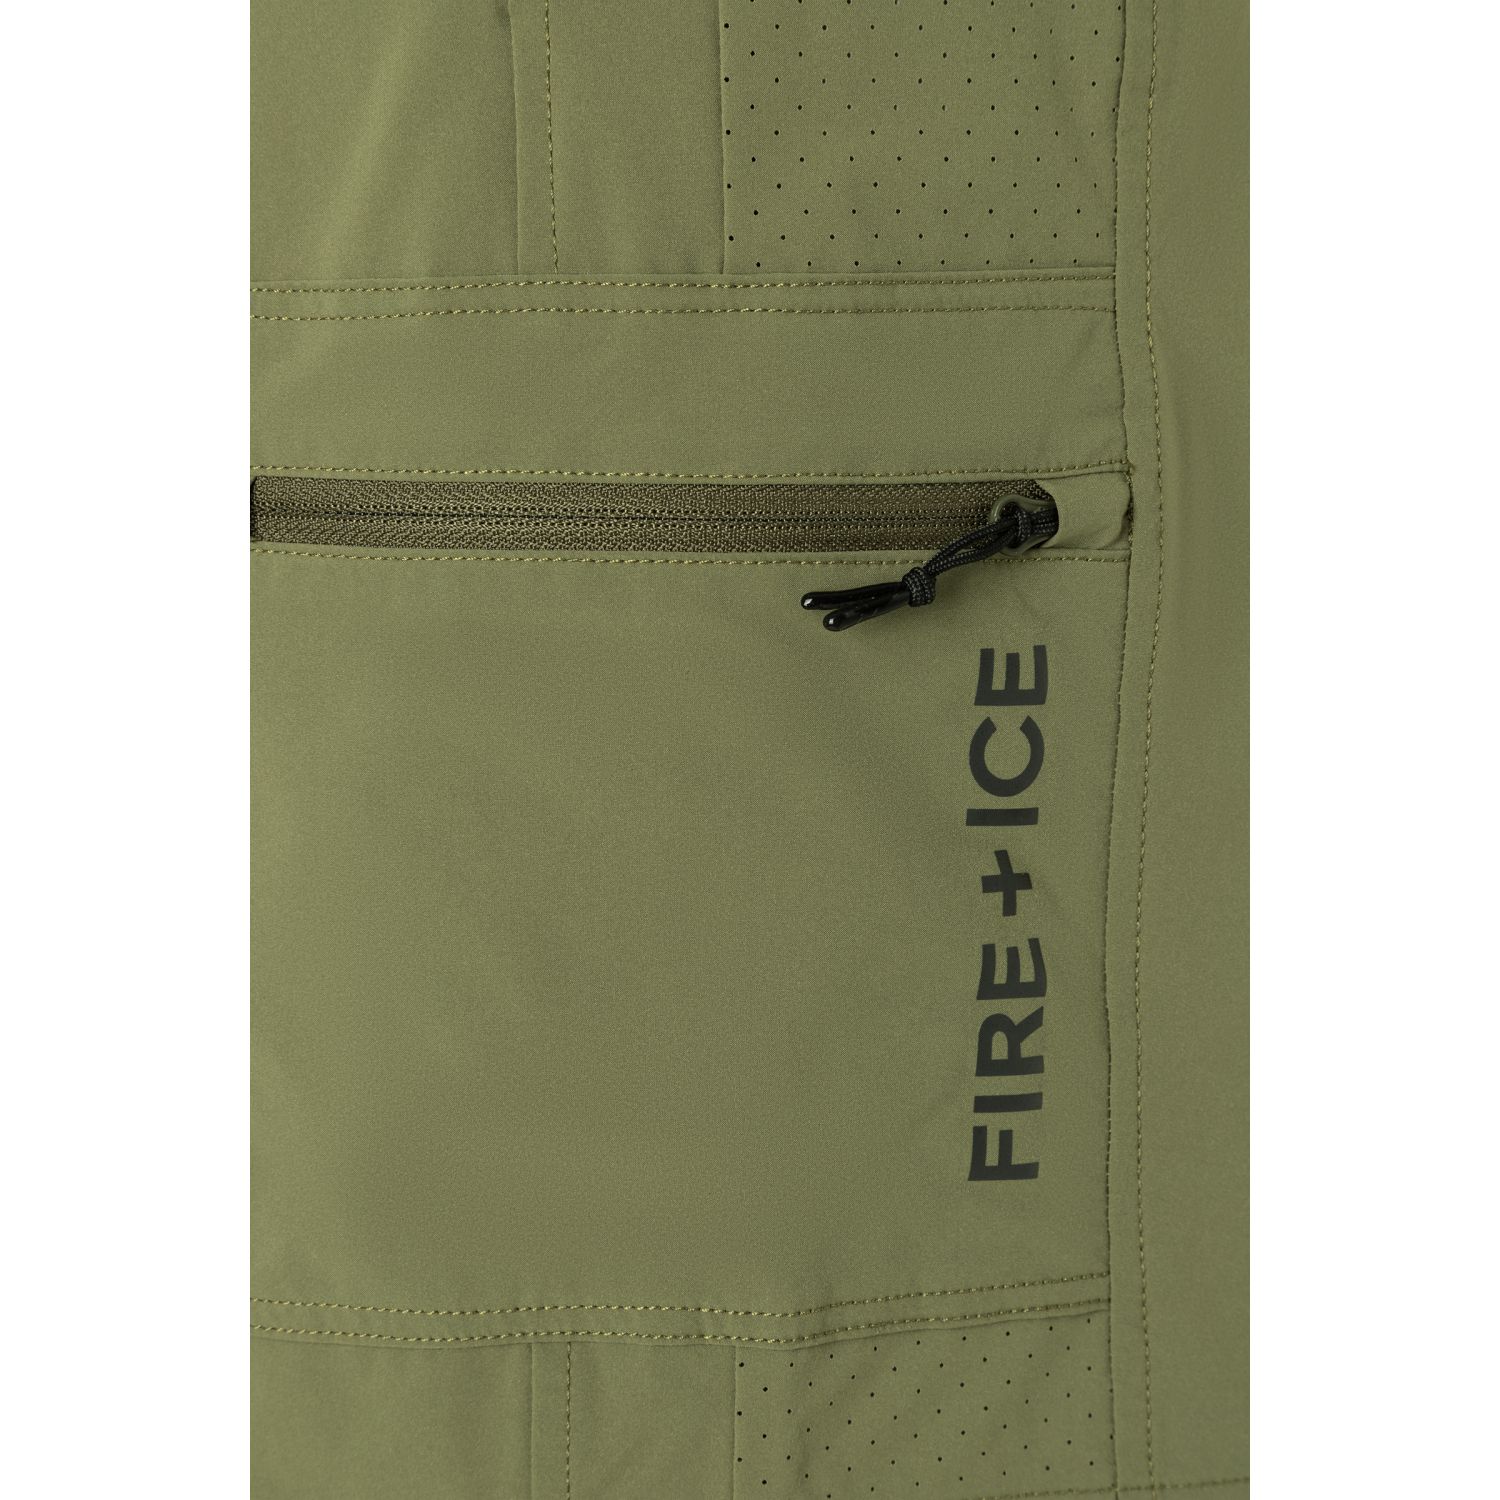 Pantaloni Scurți -  bogner fire and ice PAVEL Functional Shorts